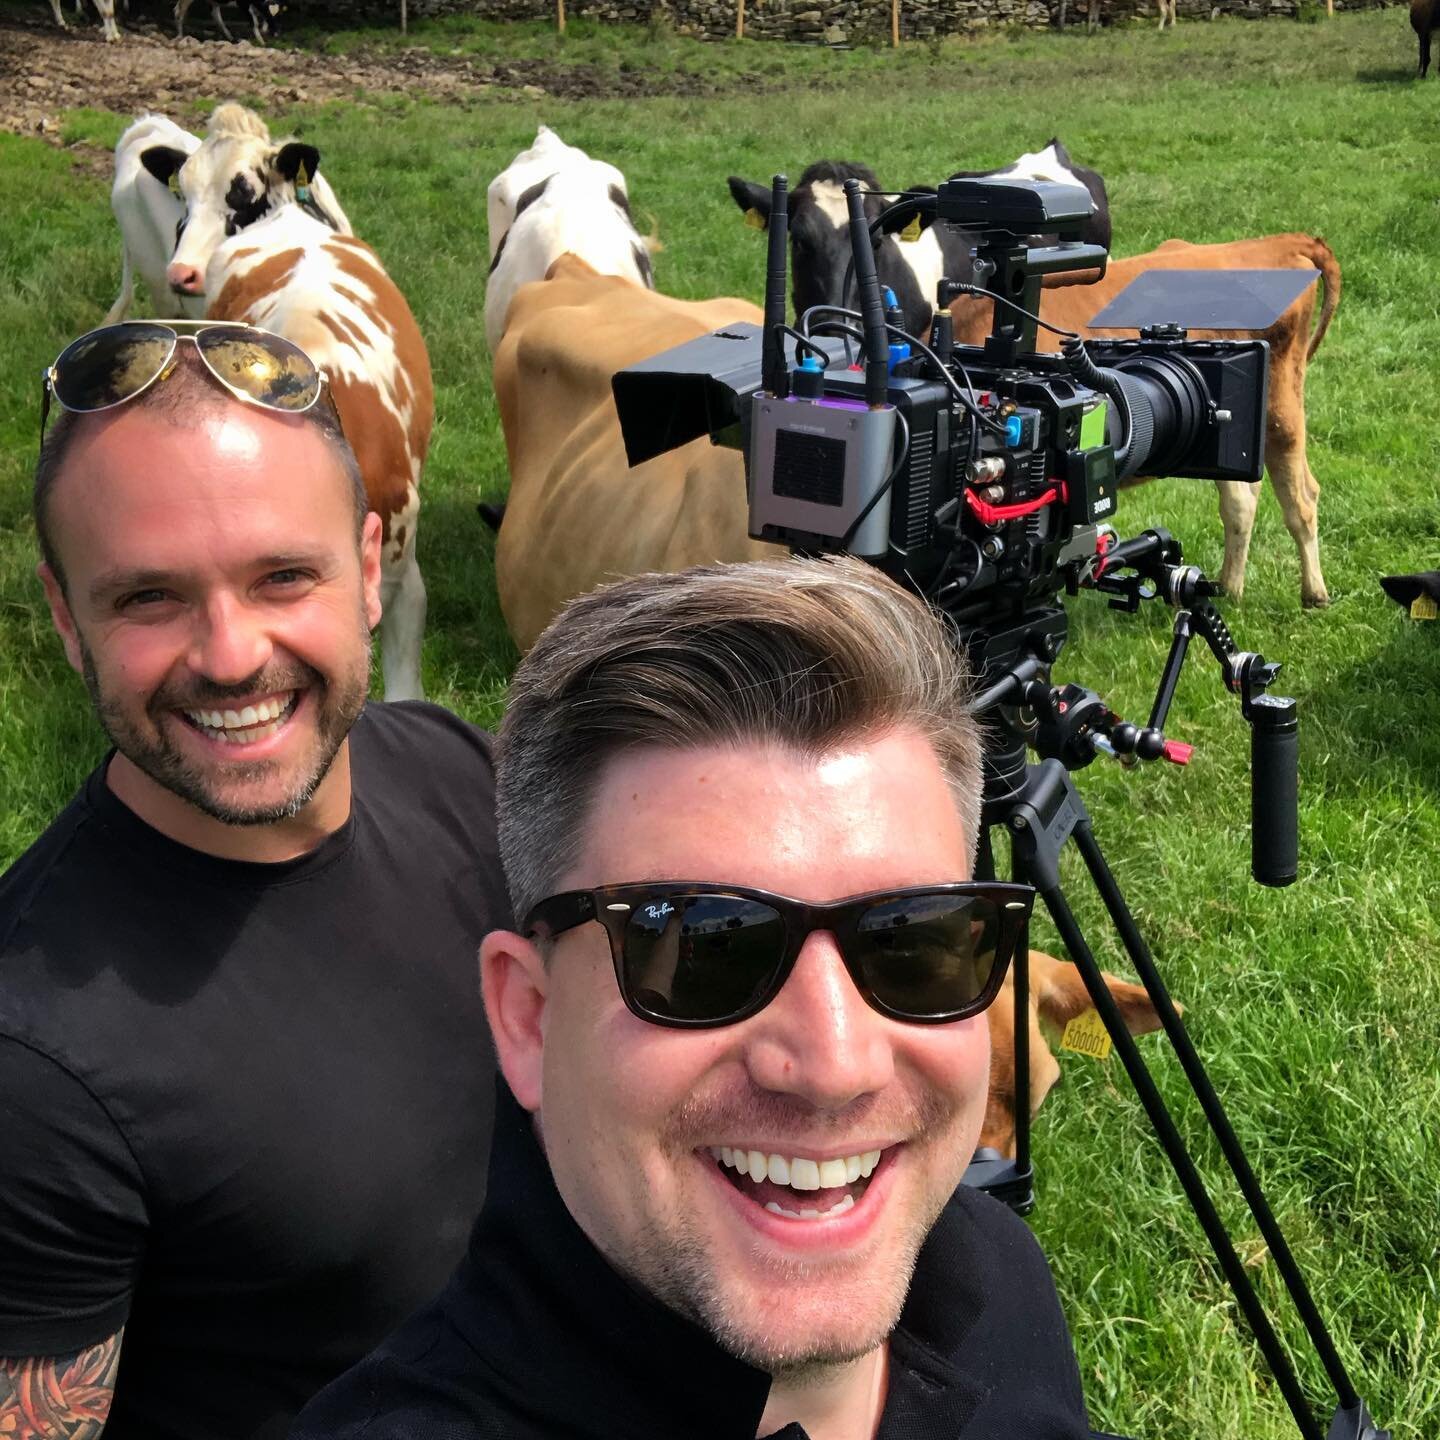 On location in Yorkshire filming a very exciting project. We made some new friends! 
.
.
#videoproduction #videography #viral #cows #farmlife #sunburn #productvideo #prlaunch